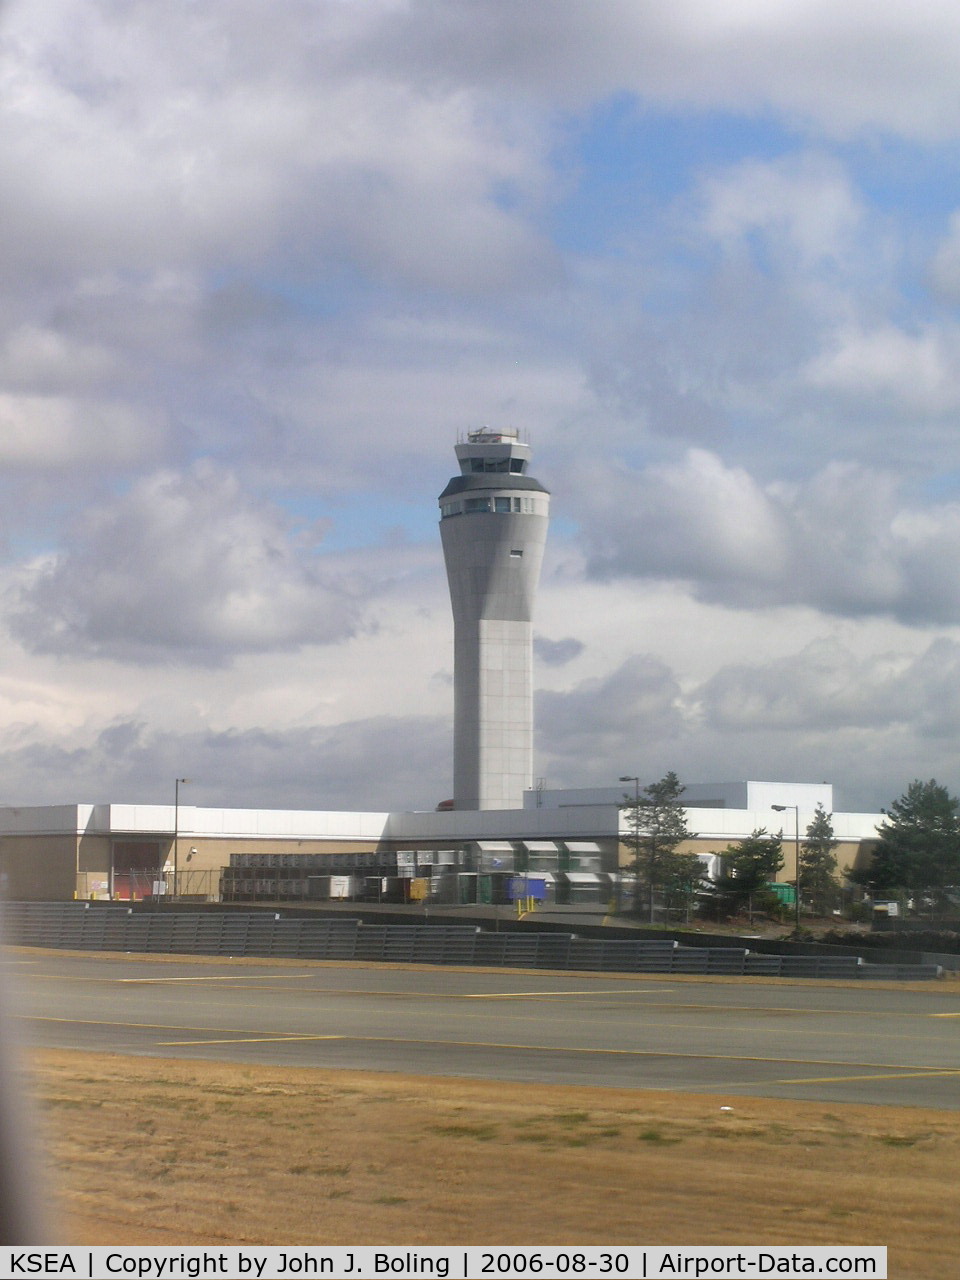 Seattle-tacoma International Airport (SEA) - New Control Tower at Seatac